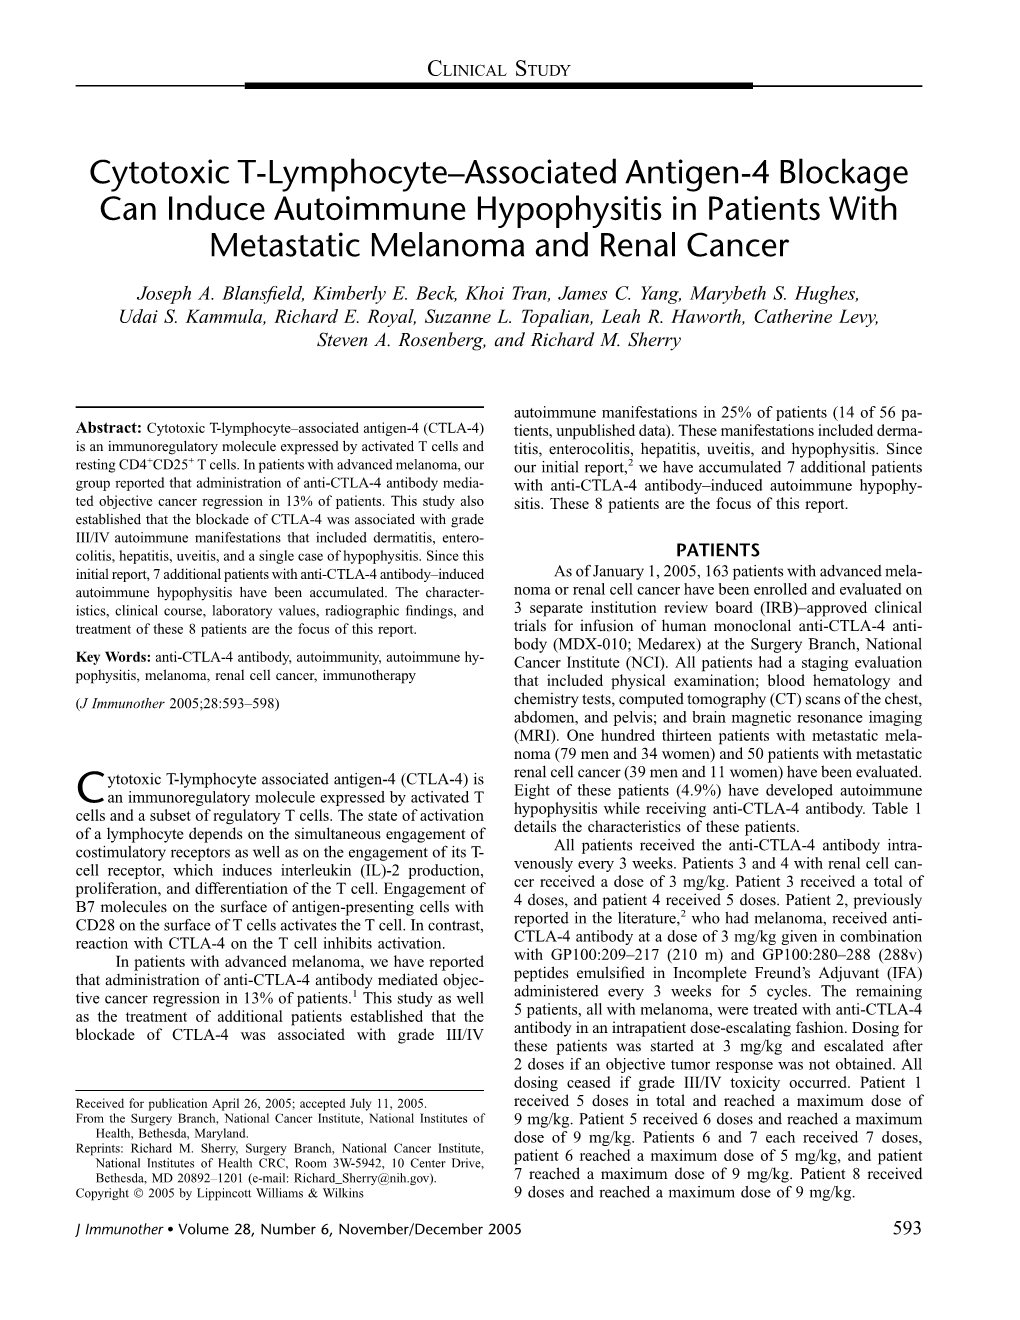 Cytotoxic T-Lymphocyte–Associated Antigen-4 Blockage Can Induce Autoimmune Hypophysitis in Patients with Metastatic Melanoma and Renal Cancer Joseph A